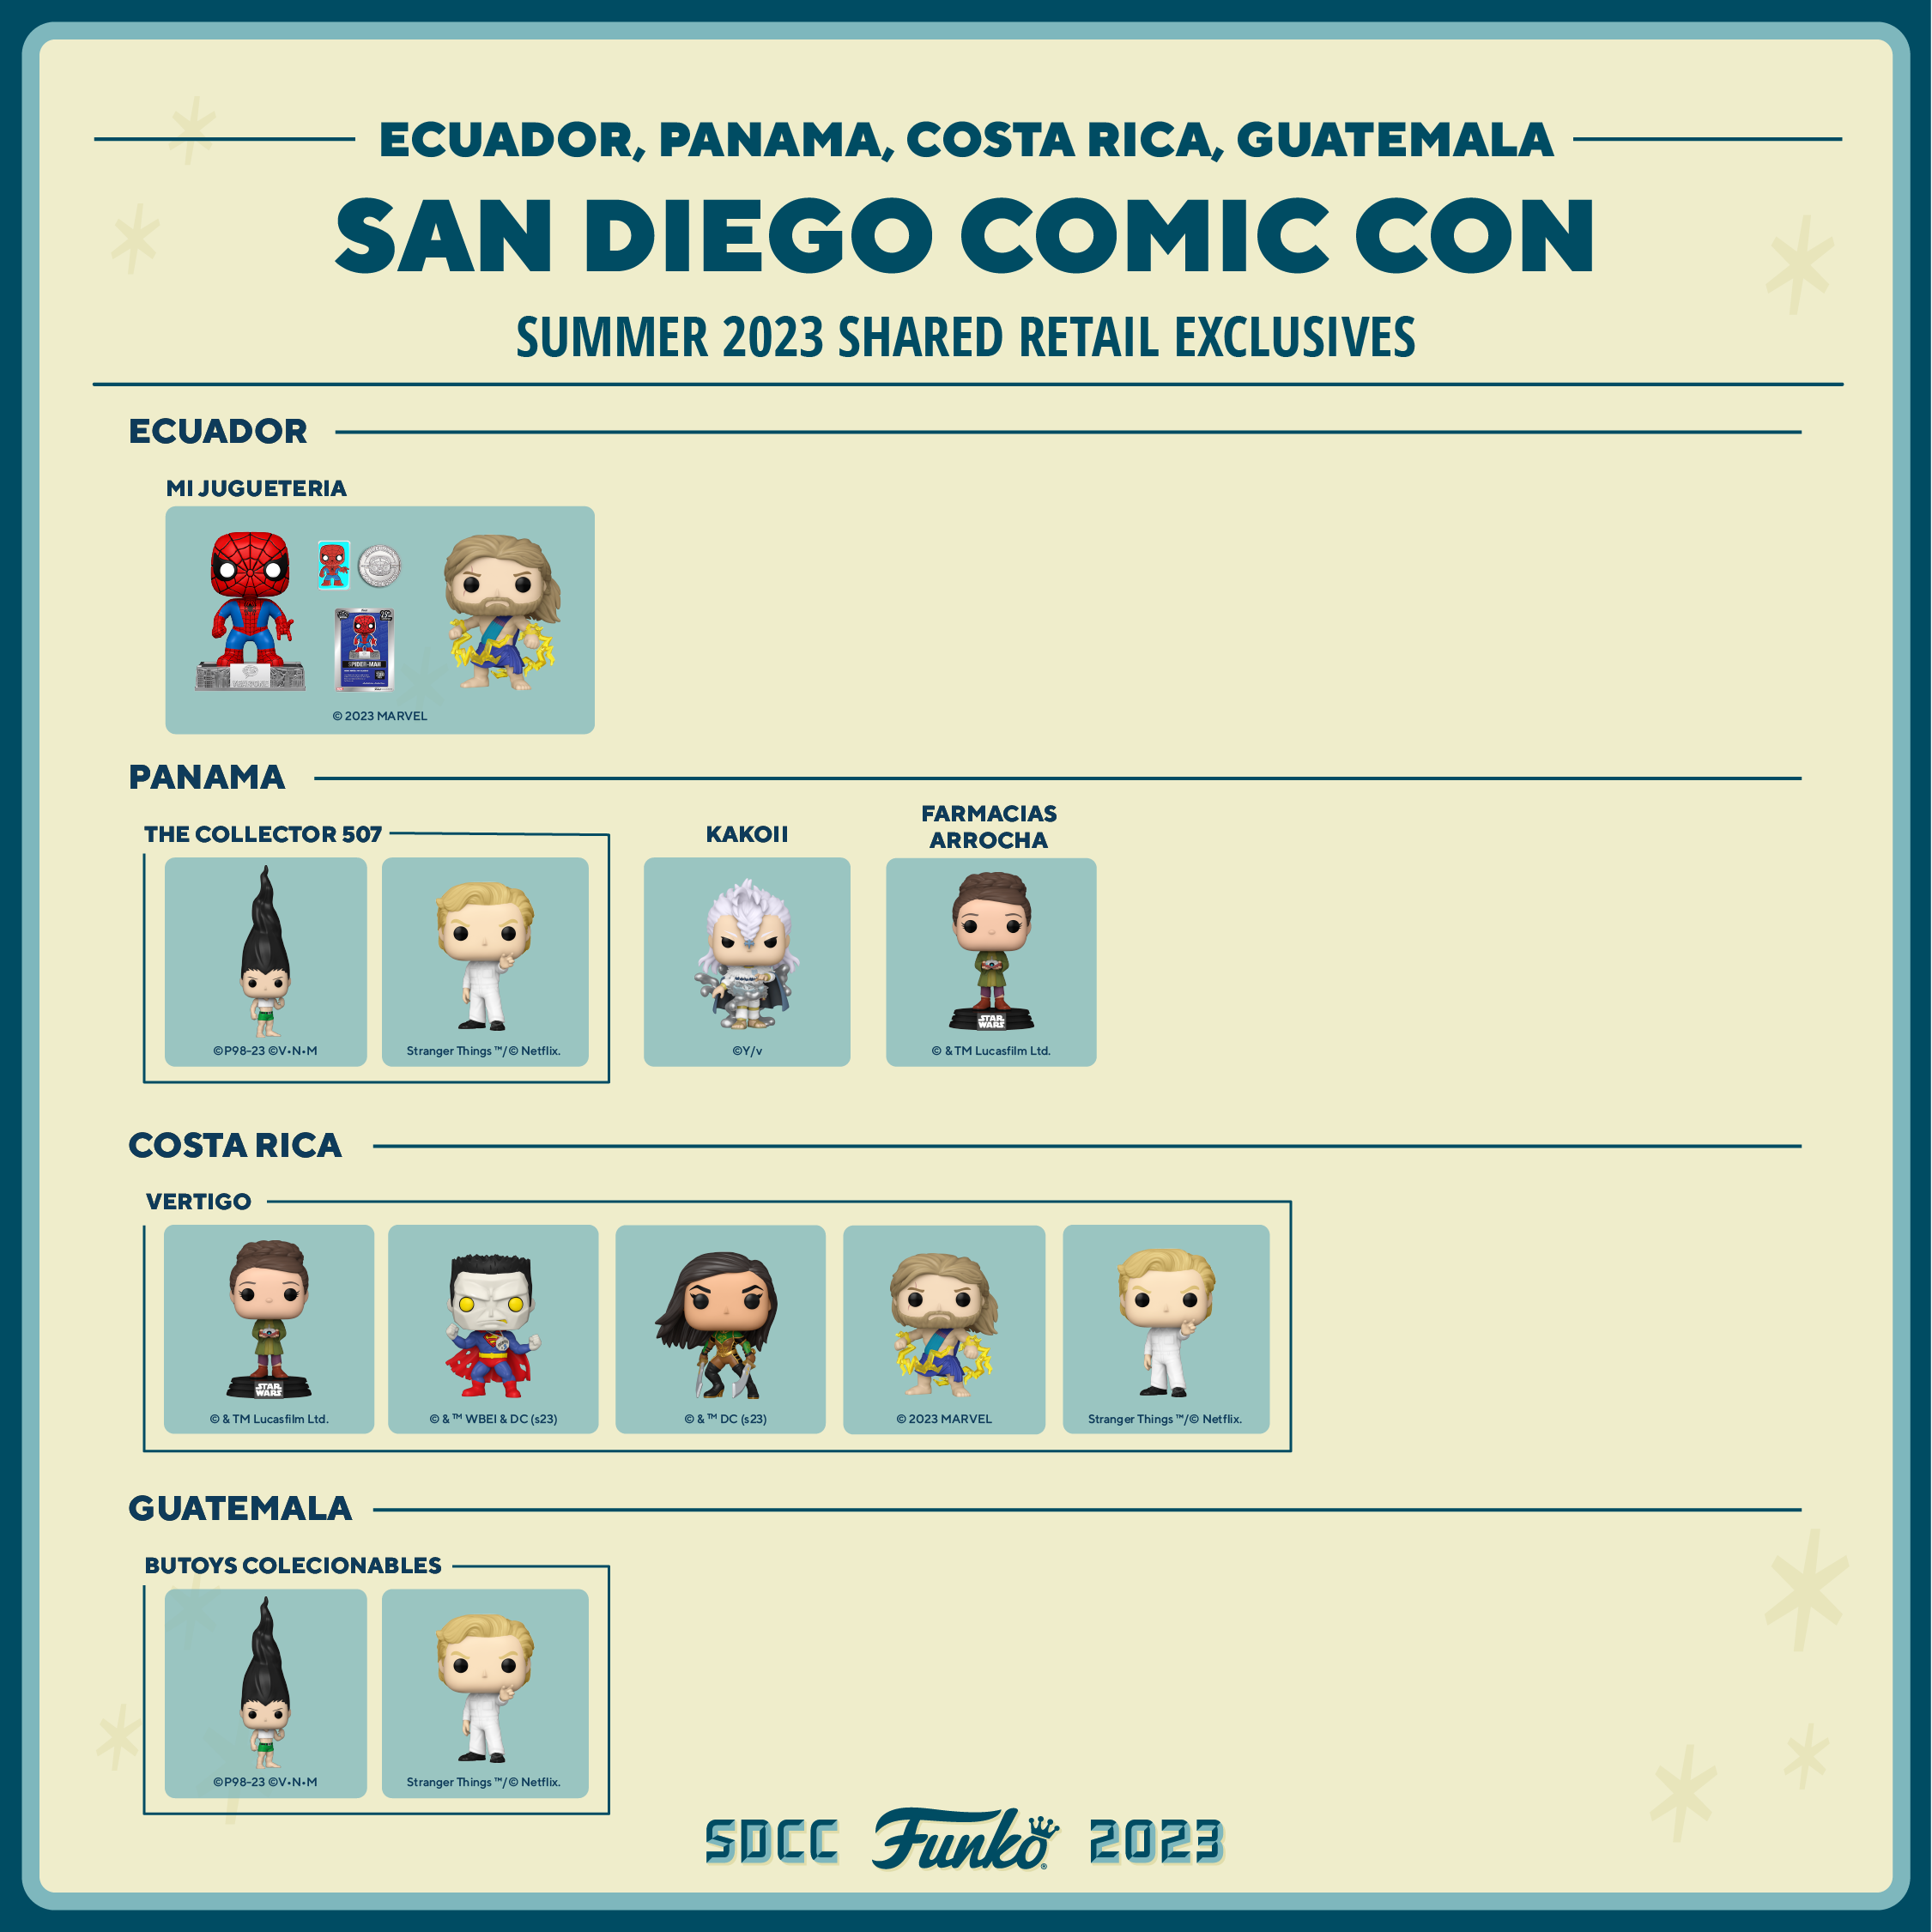 This just in from the Funkoville Visitor's Center, here is the 2023 SDCC Shared Retailer Guide for Ecuador, Panama, Costa Rica, Guatemala!